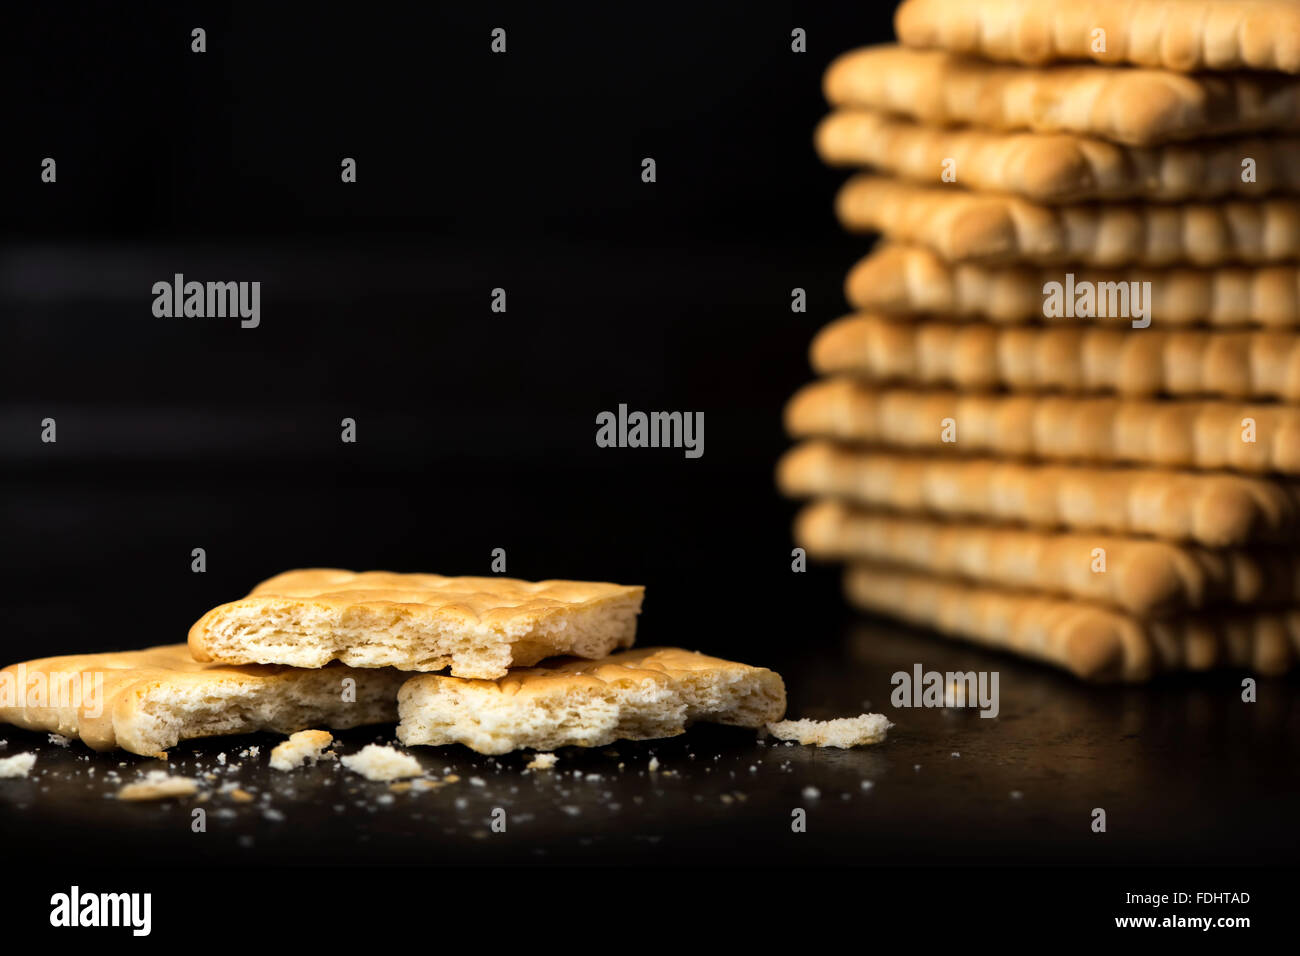 Crispy crackers against a black background Stock Photo